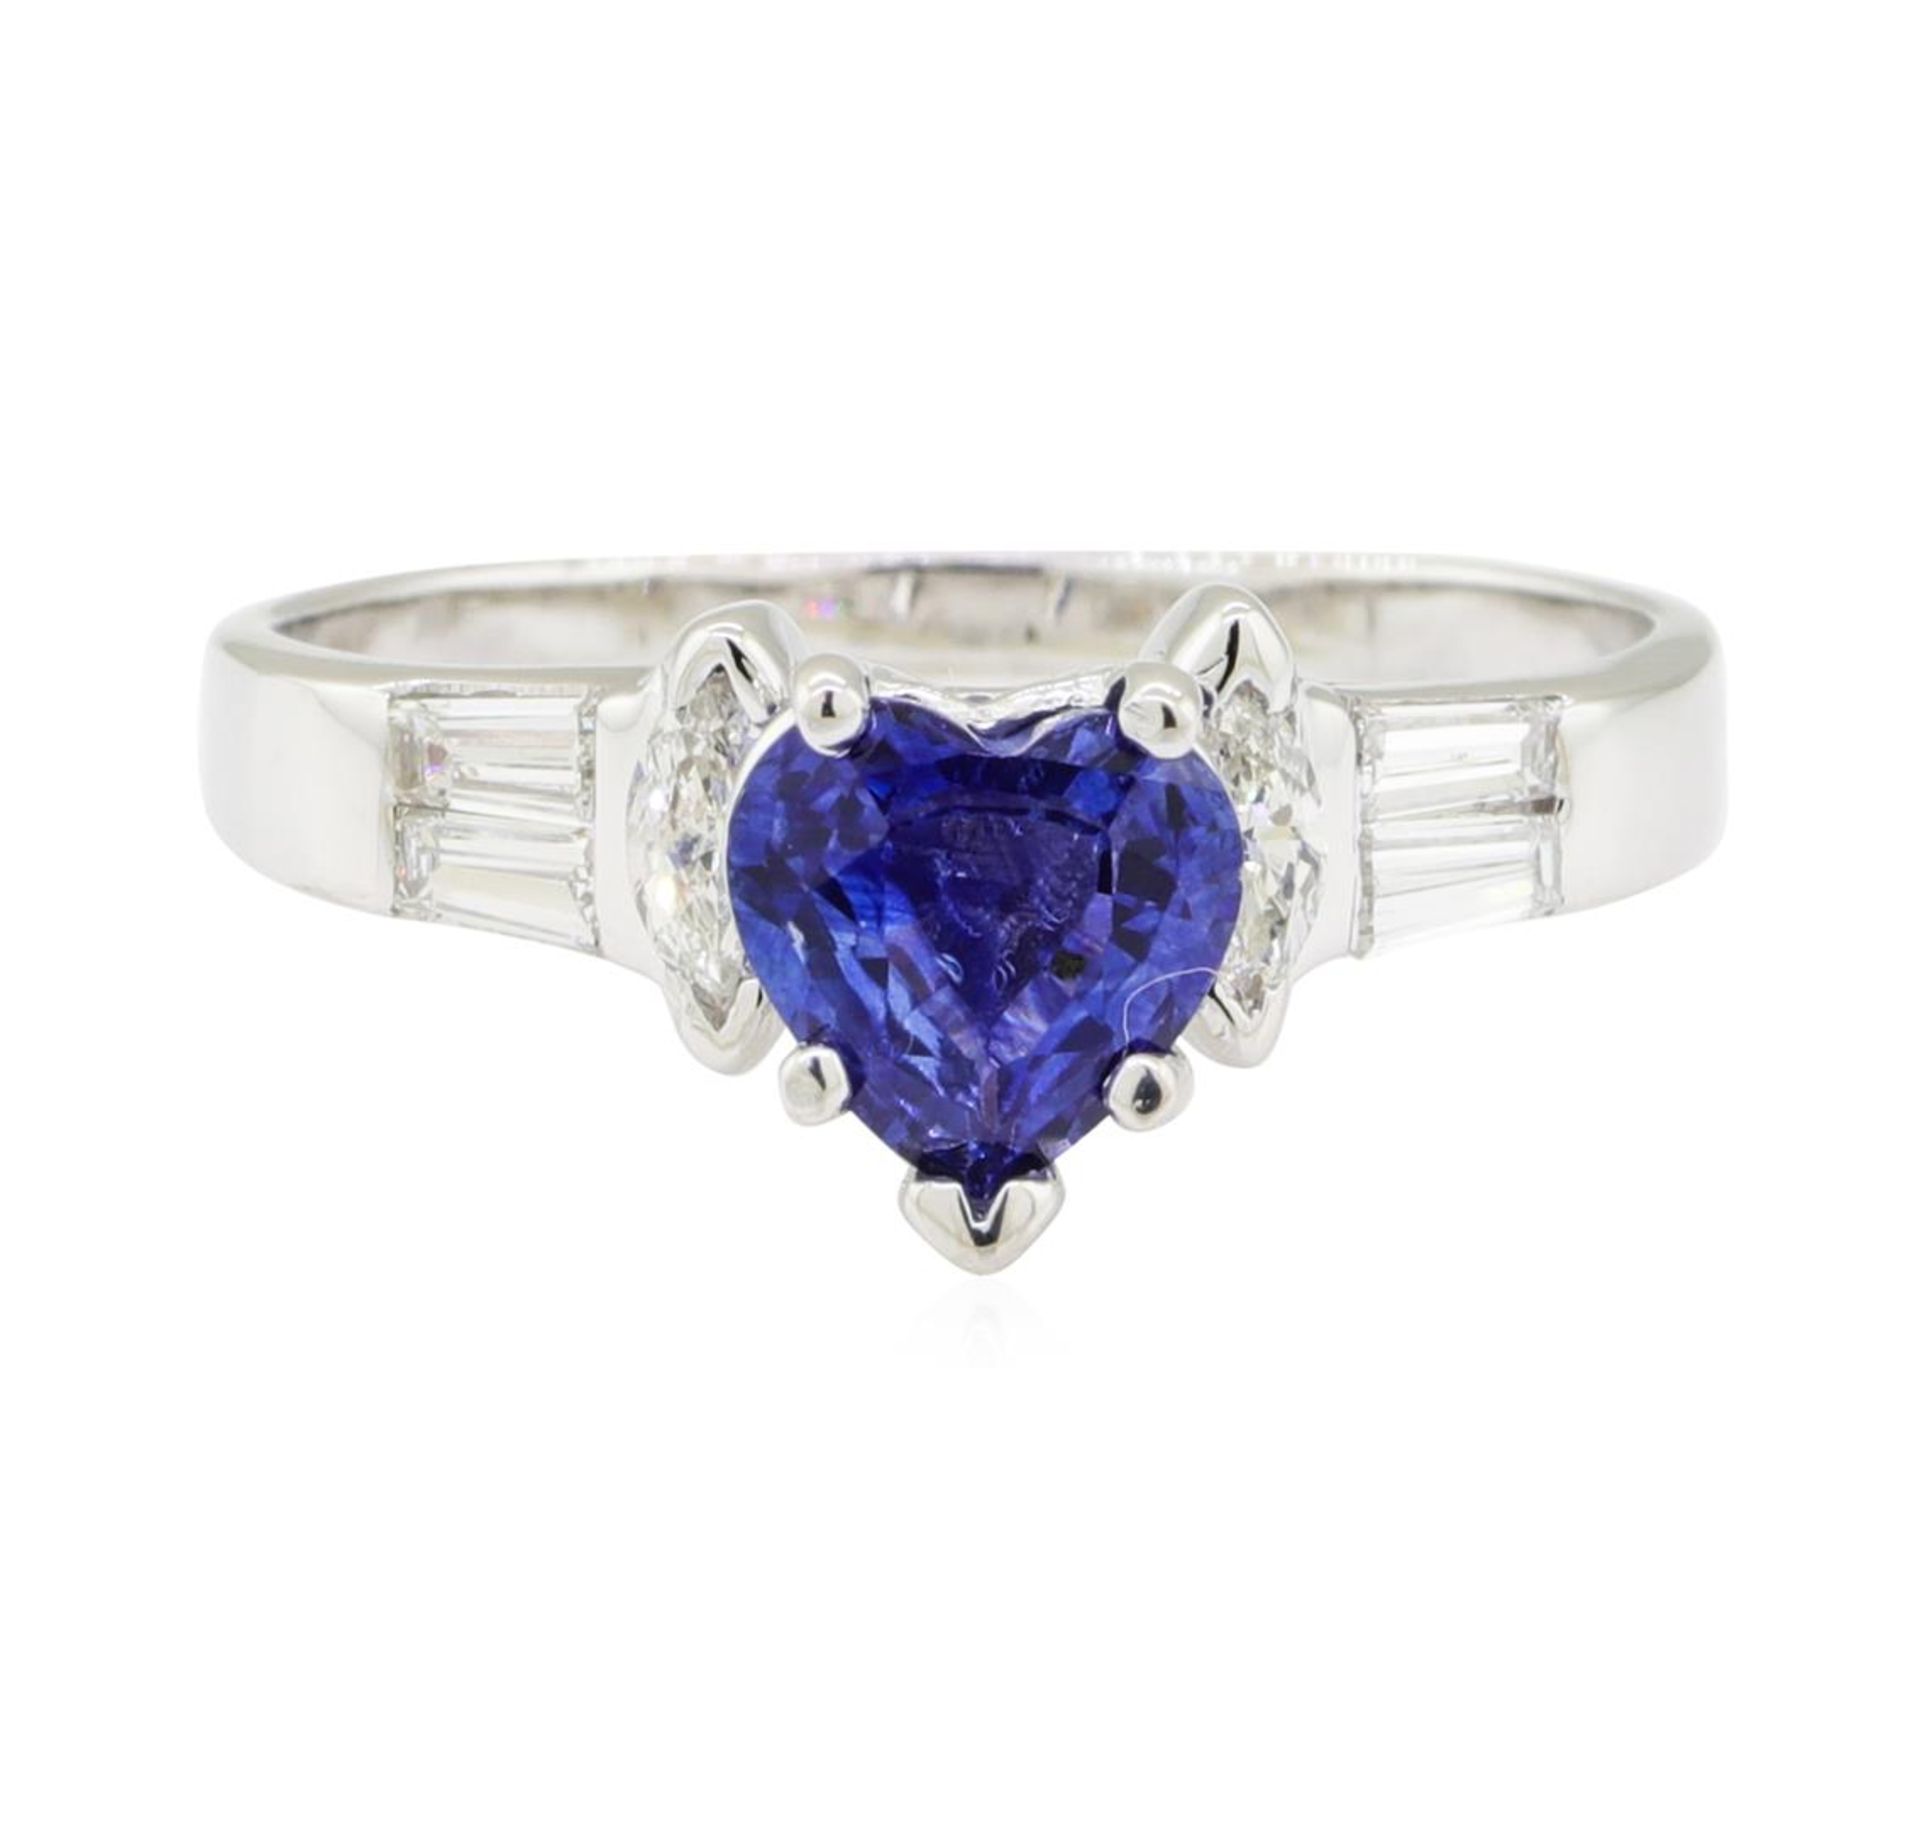 1.87 ctw Sapphire and Diamond Ring - 14KT White Gold - Image 2 of 5